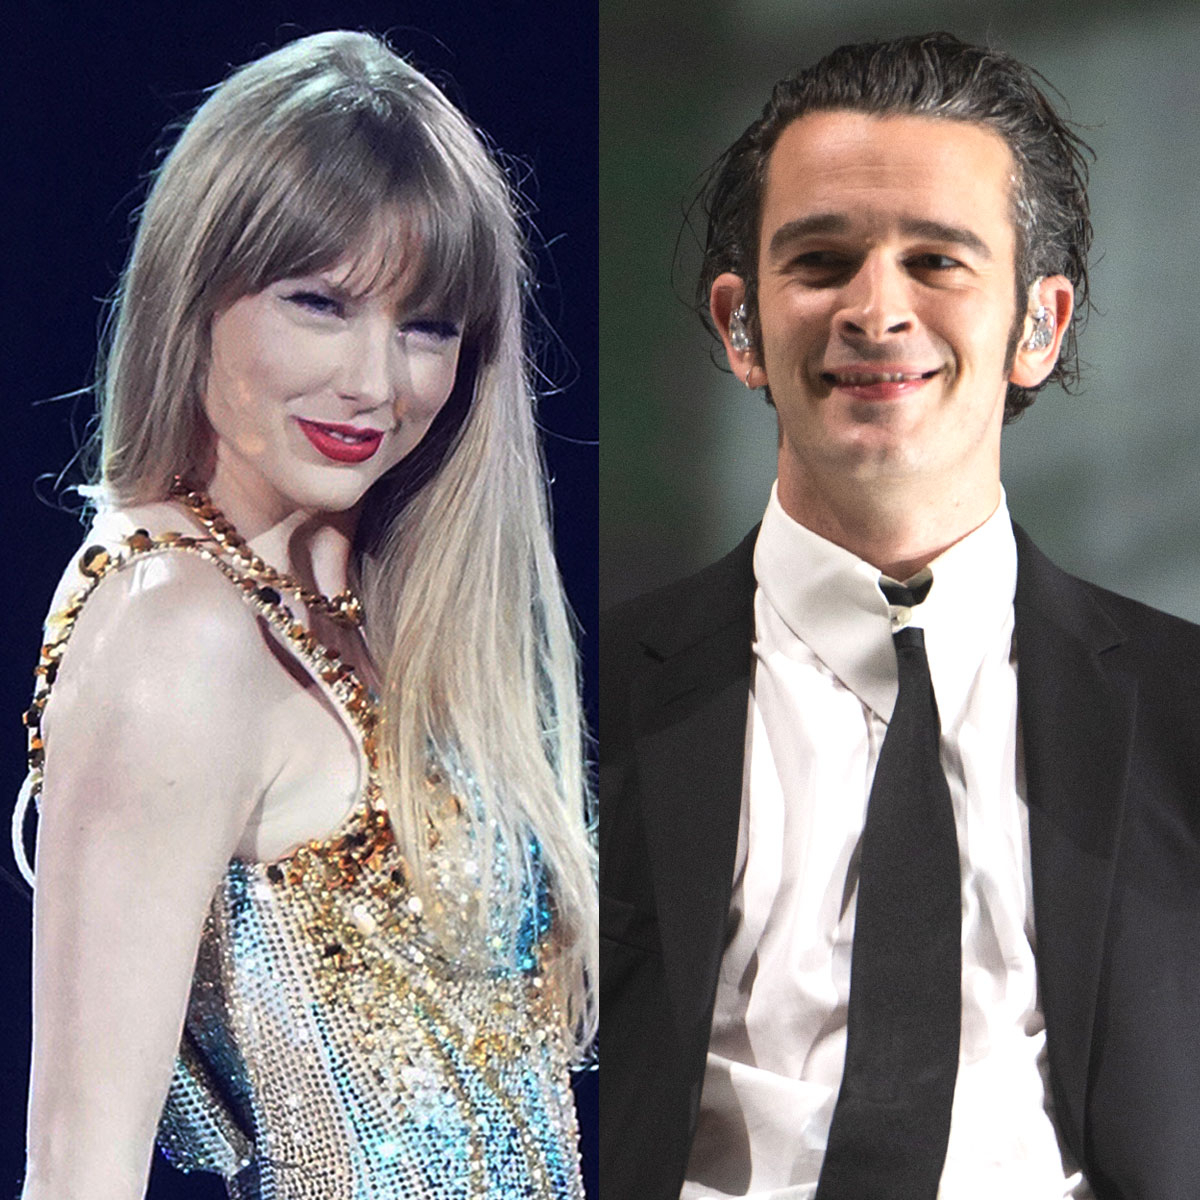 All About The 1975's Matty Healy, Including His Work with Taylor Swift, set  it off lead singer 